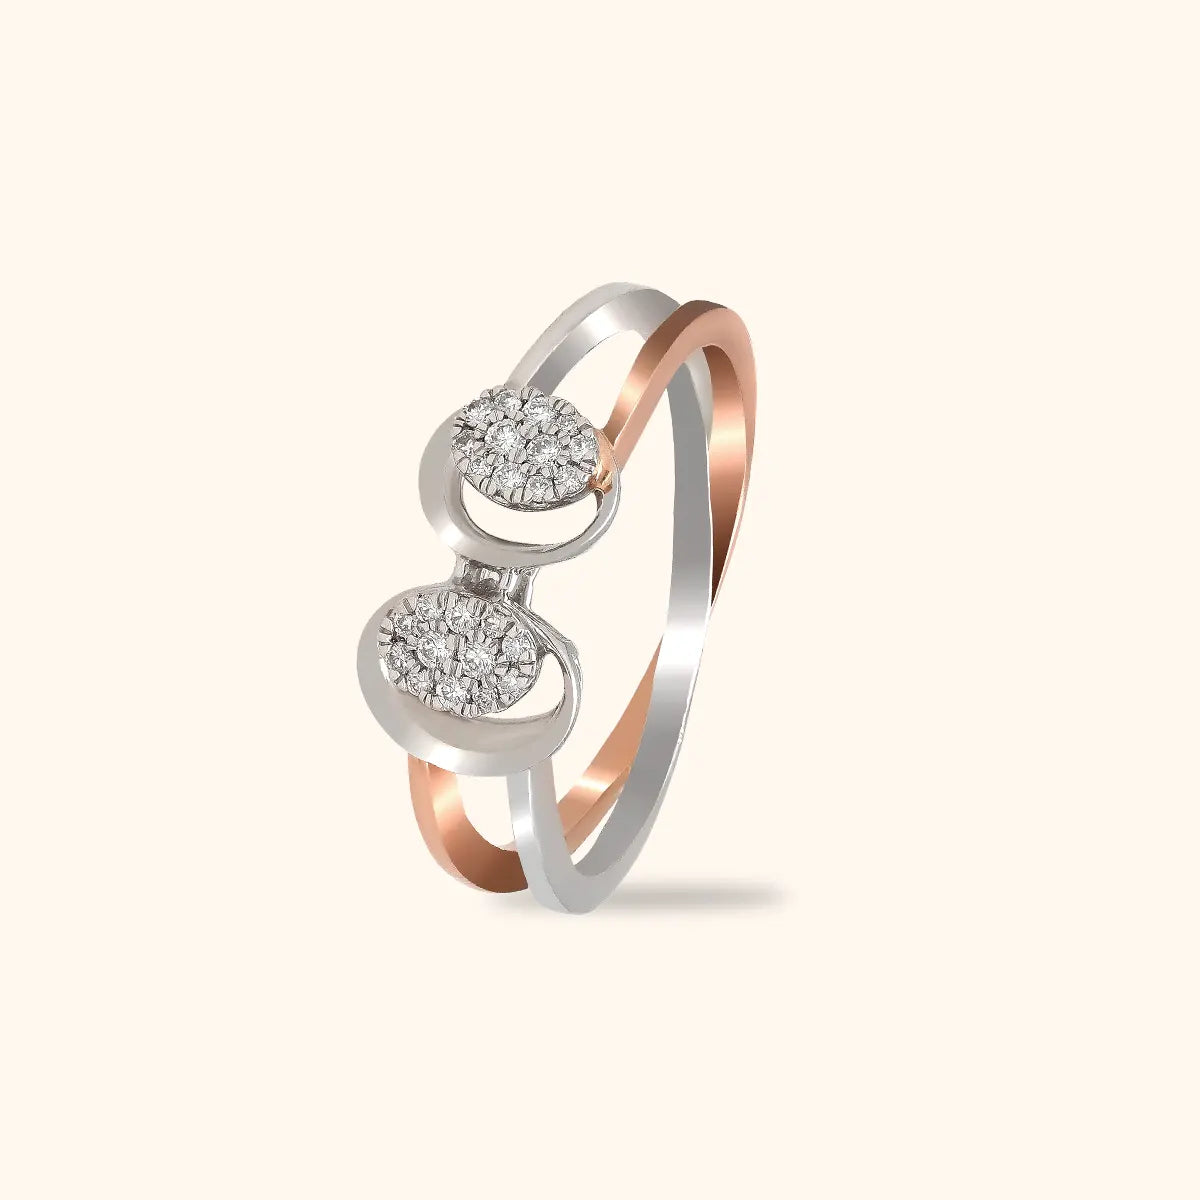 Buy Mine Platinum PT 950 Two Tone Purity Cocktail Ring for Women Online